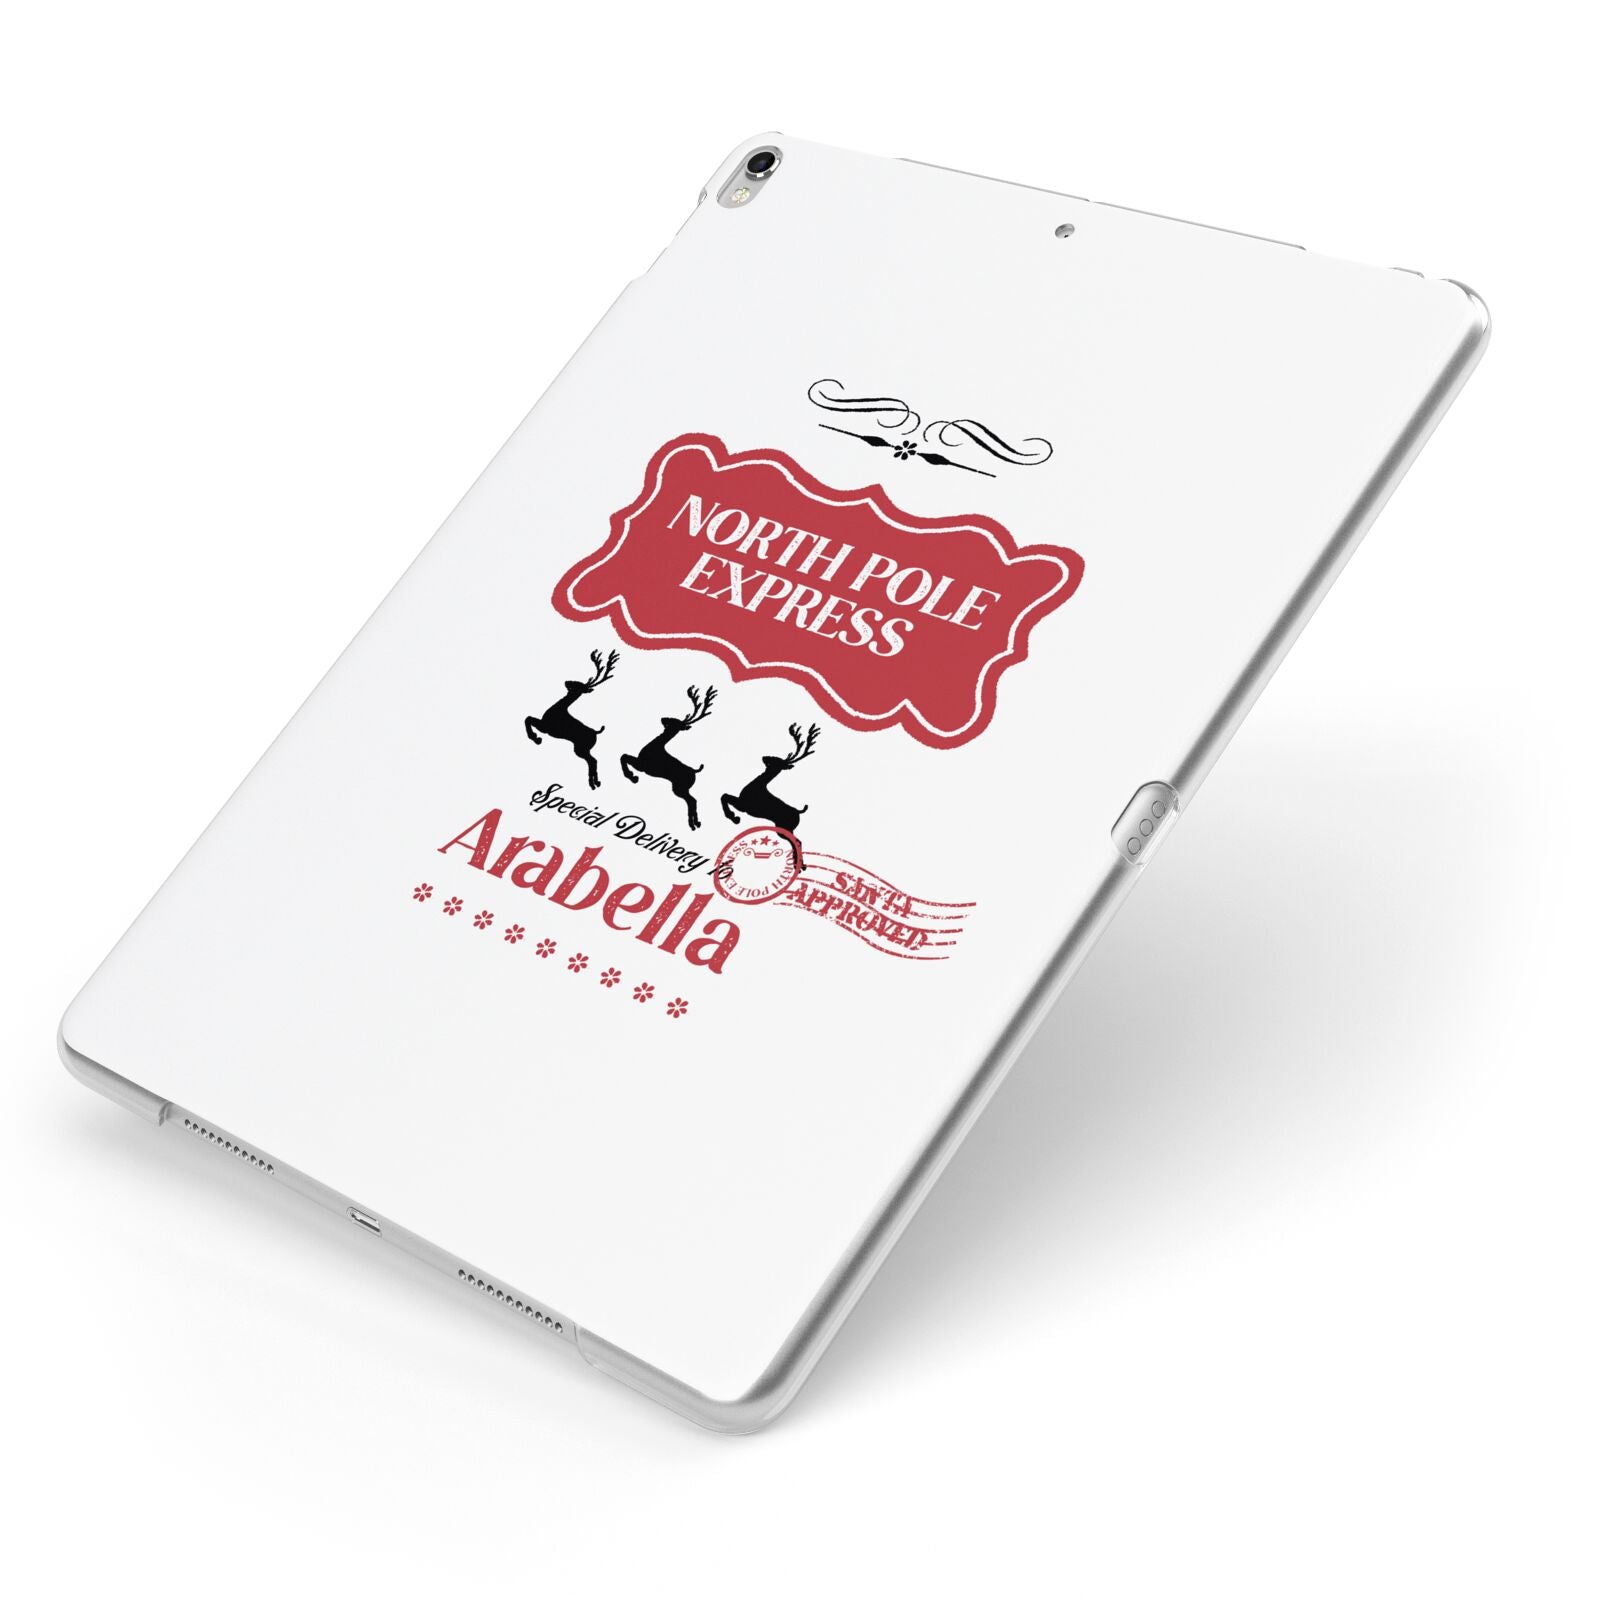 North Pole Express Personalised Apple iPad Case on Silver iPad Side View